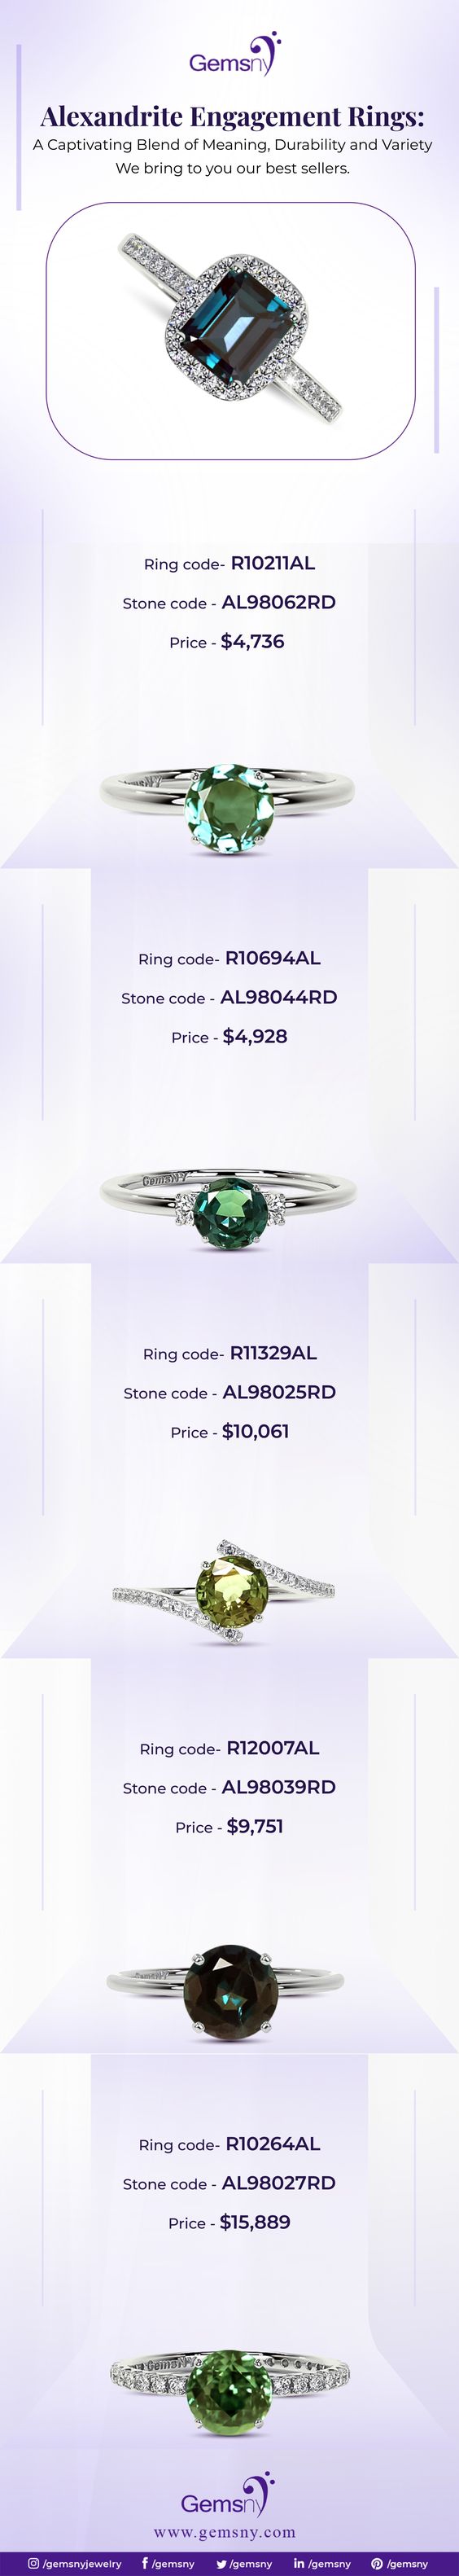 §

Alexandrite Engagement Rings:
A Captivating Blend of Meaning, Durability and Variety
We bring to you our best sellers

 

Ring code- R10211AL
Stone code - AL98062RD
price - $4,736

 

Ring code- RI0O694AL

Stone code - AL98044RD
price - $4,928

 

Ring code- R11329AL

Stone code - AL98025RD

price - $10,061

 

Ring code- R12007AL

Stone code - AL9B039RD

price - $9,751

 

Ring code- R10264AL

Stone code - AL98027RD
price - $15,889

 

Comat).

Www. gemsny.com